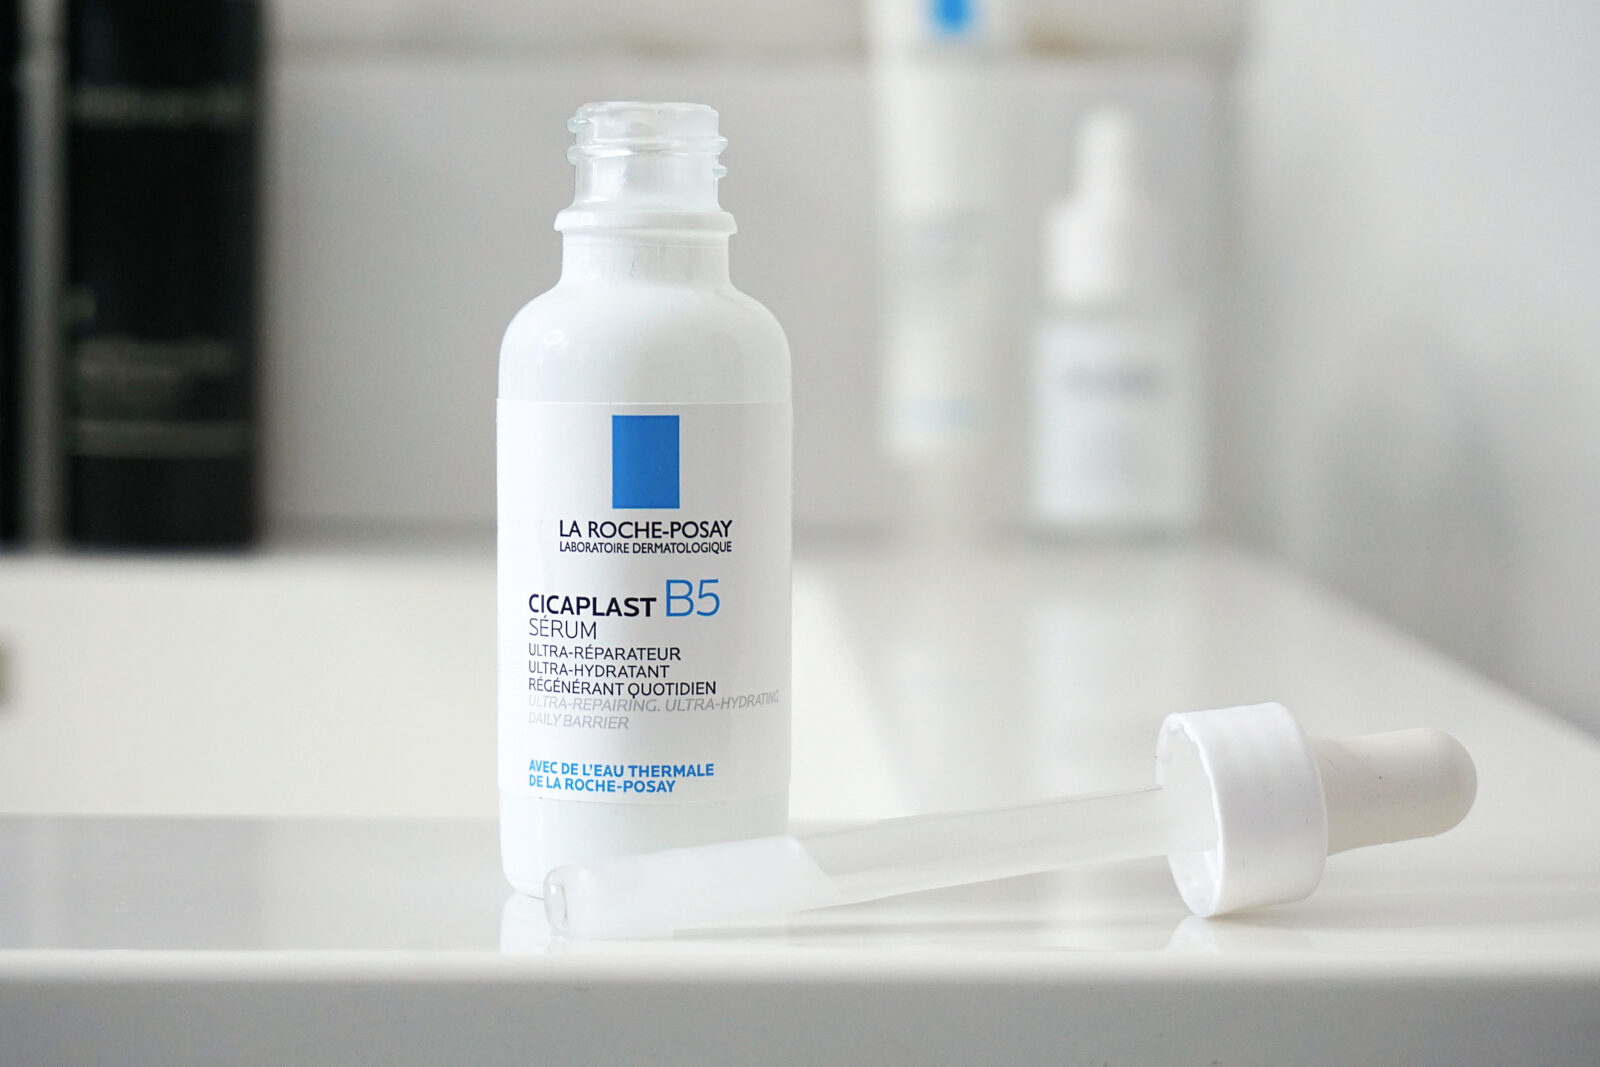 NEW* La Roche-Posay Cicaplast B5 Serum (Exclusively at Cult Beauty) -  OMGBART